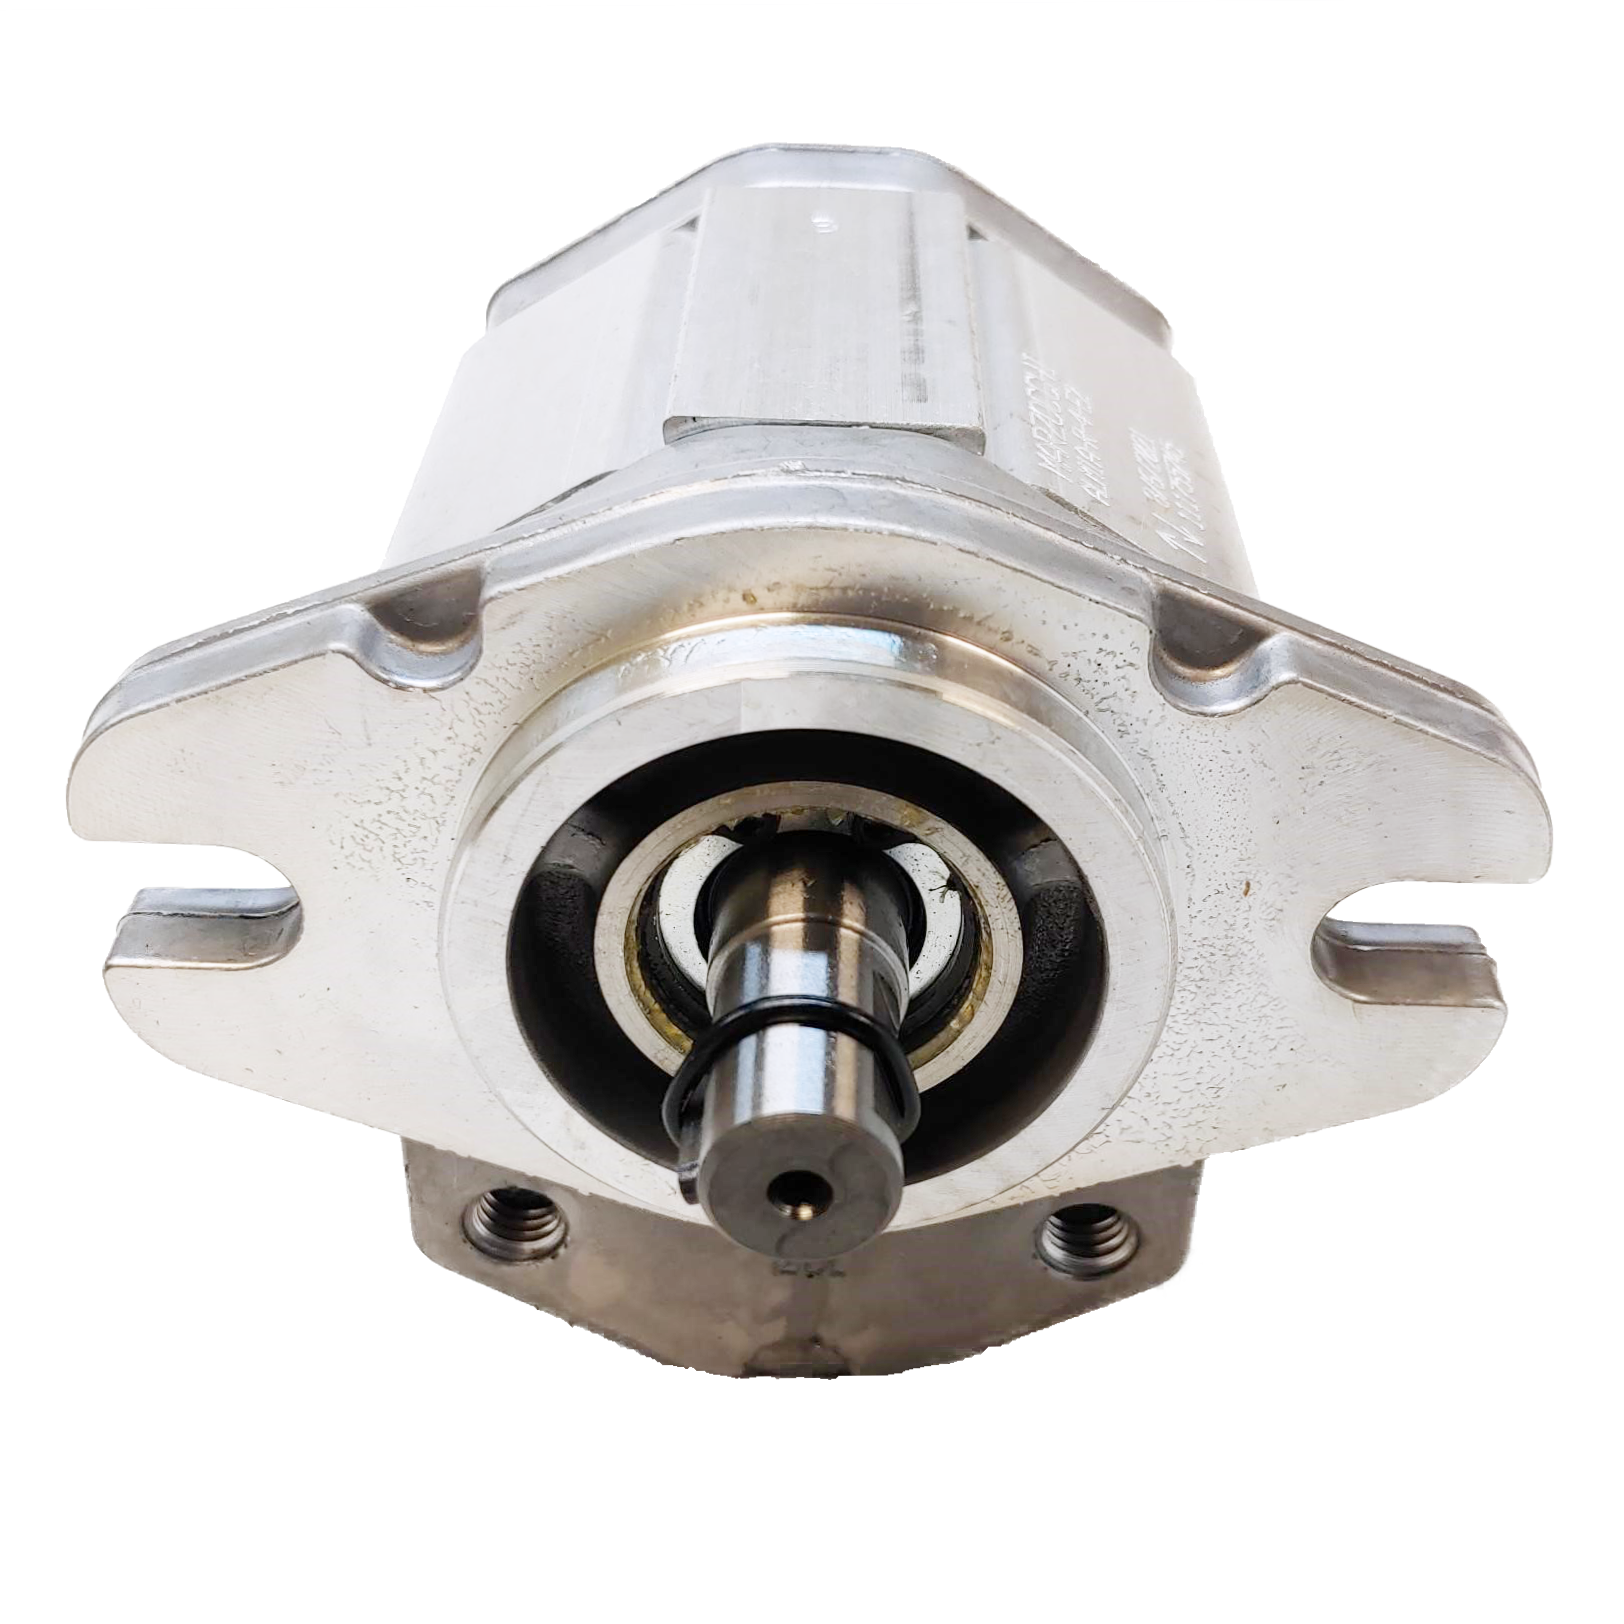 ALM1A-R-11-E2 : Marzocchi Gear Motor, Bidirectional, 7.6cc, 2900psi rated, 3500RPM, 0.625 (5/8") #10 SAE ports, 1/2" Bore x 1/8" Keyed Shaft